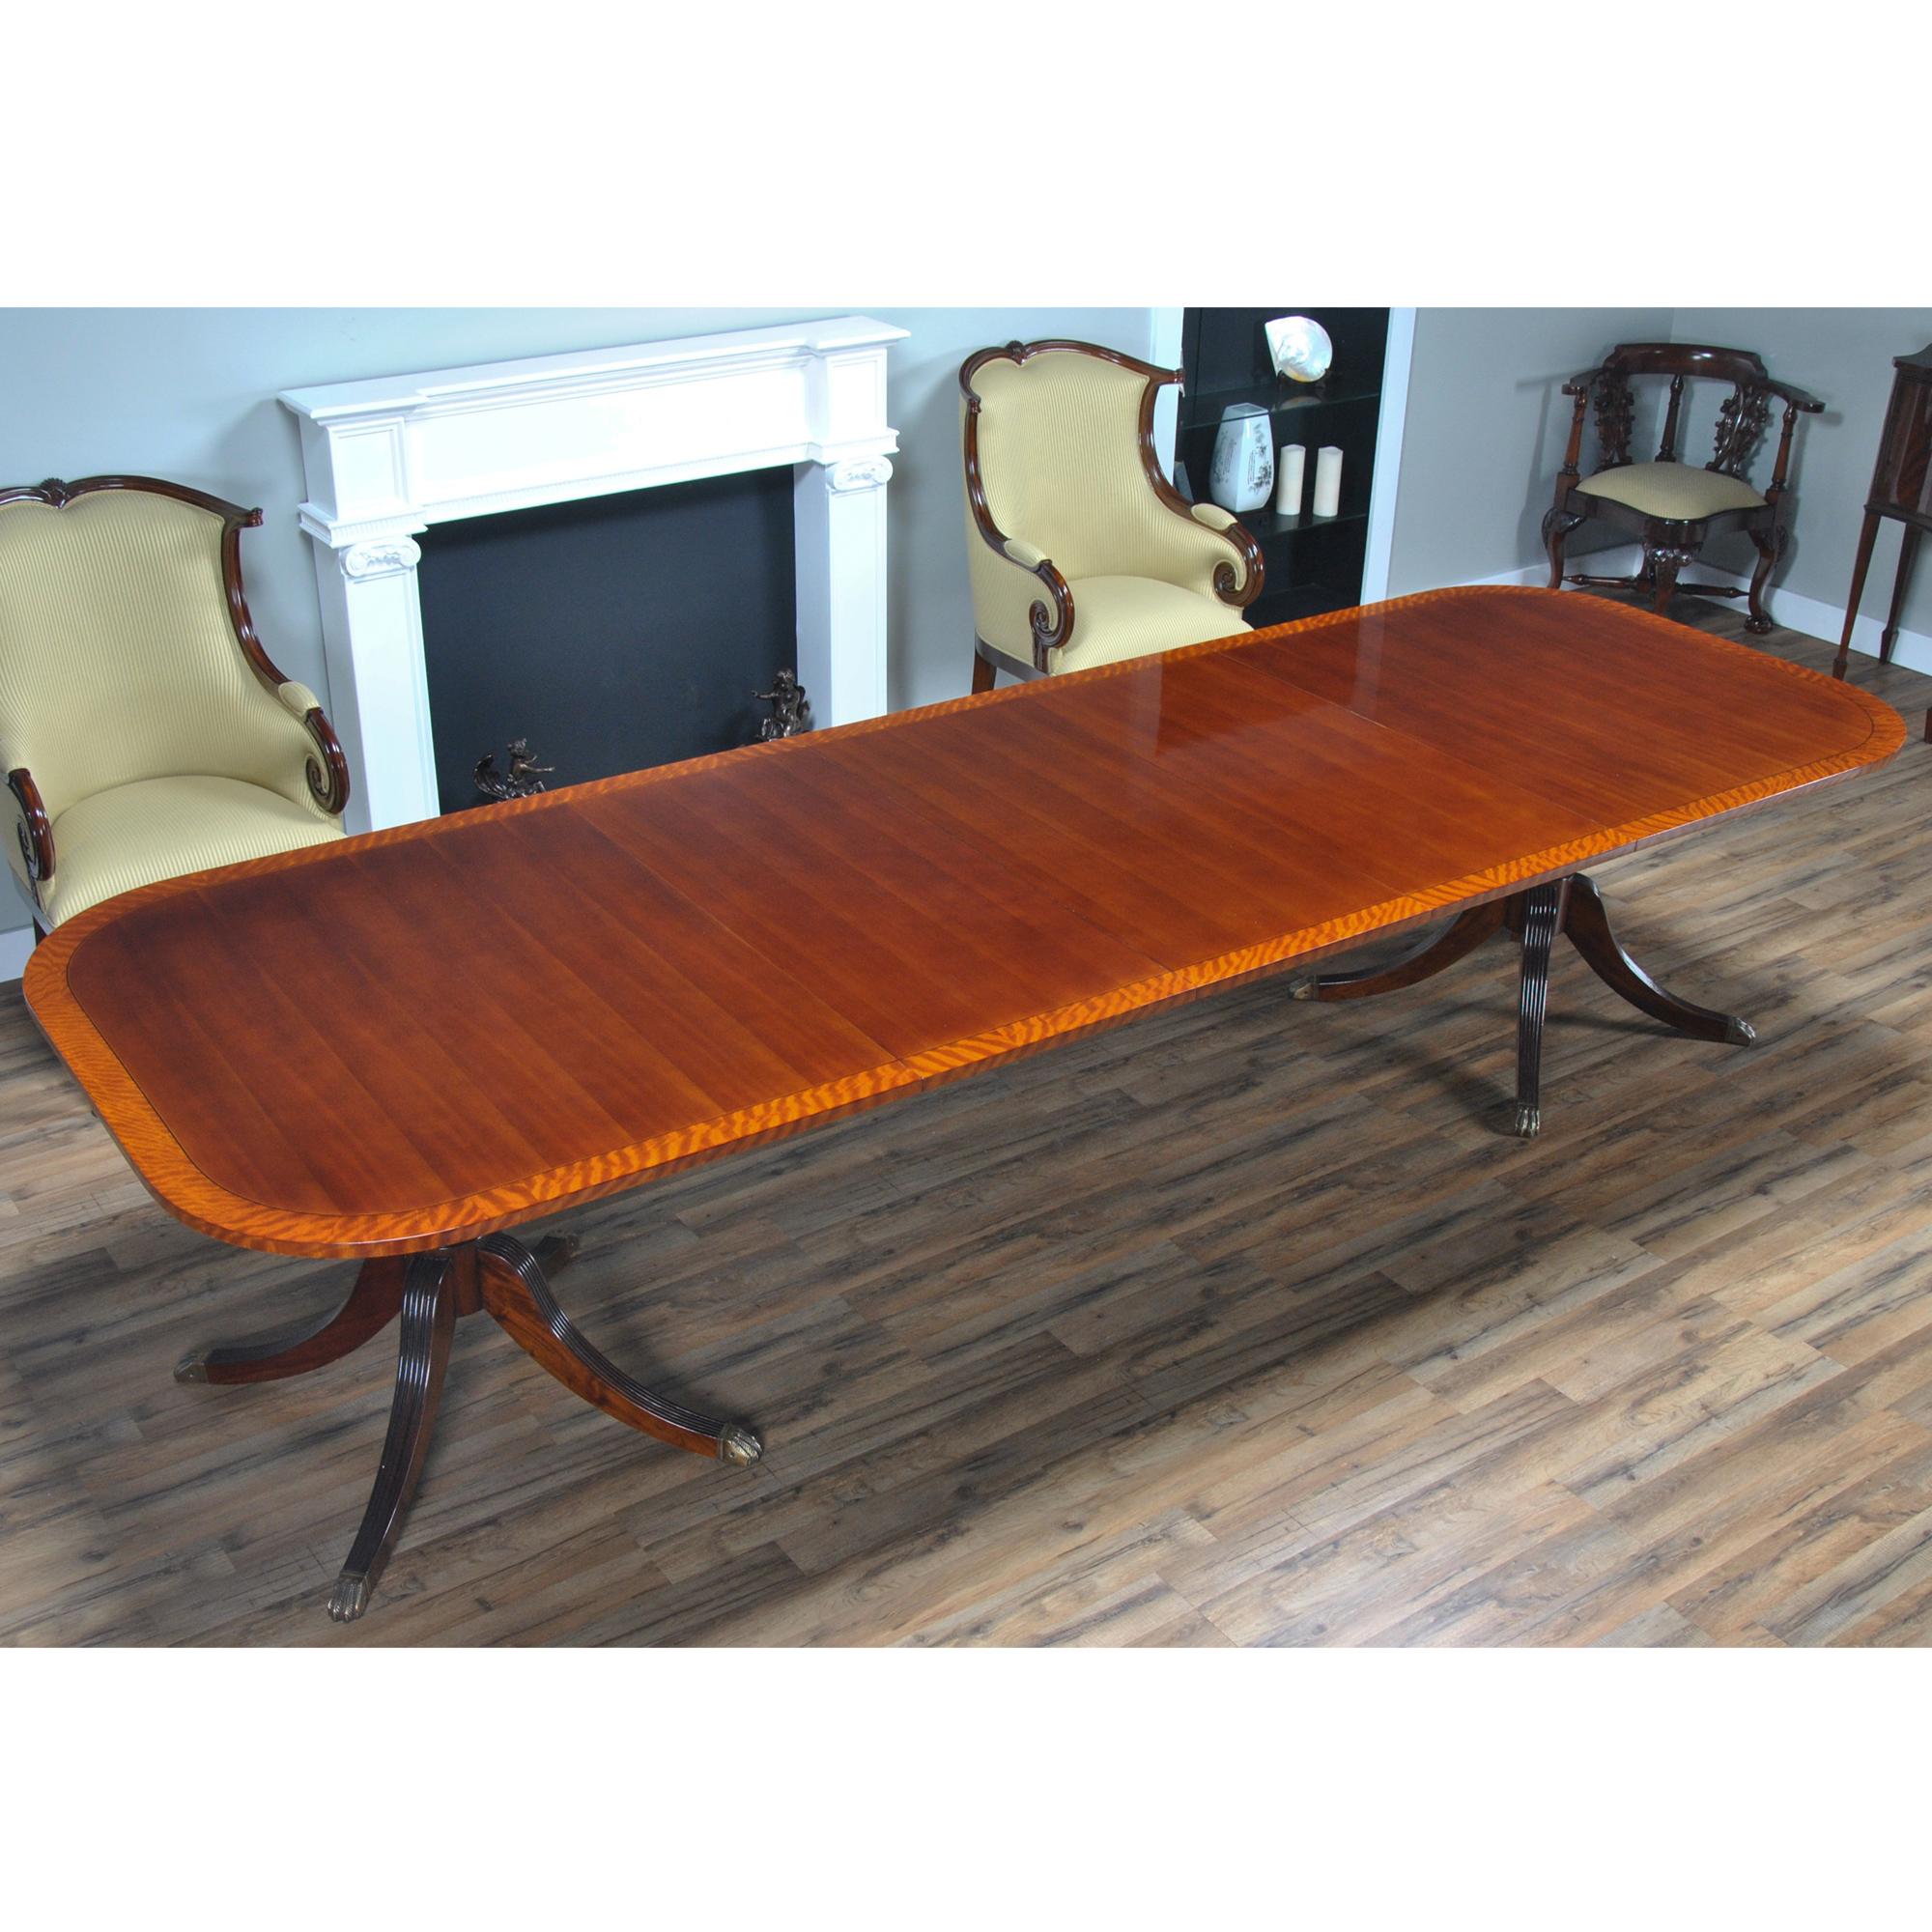 This version of a Hepplewhite Dining Table is Inspired by great furniture designers such as George Hepplewhite in the 18th century this long dining table is both simple and elegant.  In order to give this table such a great look a straight grained